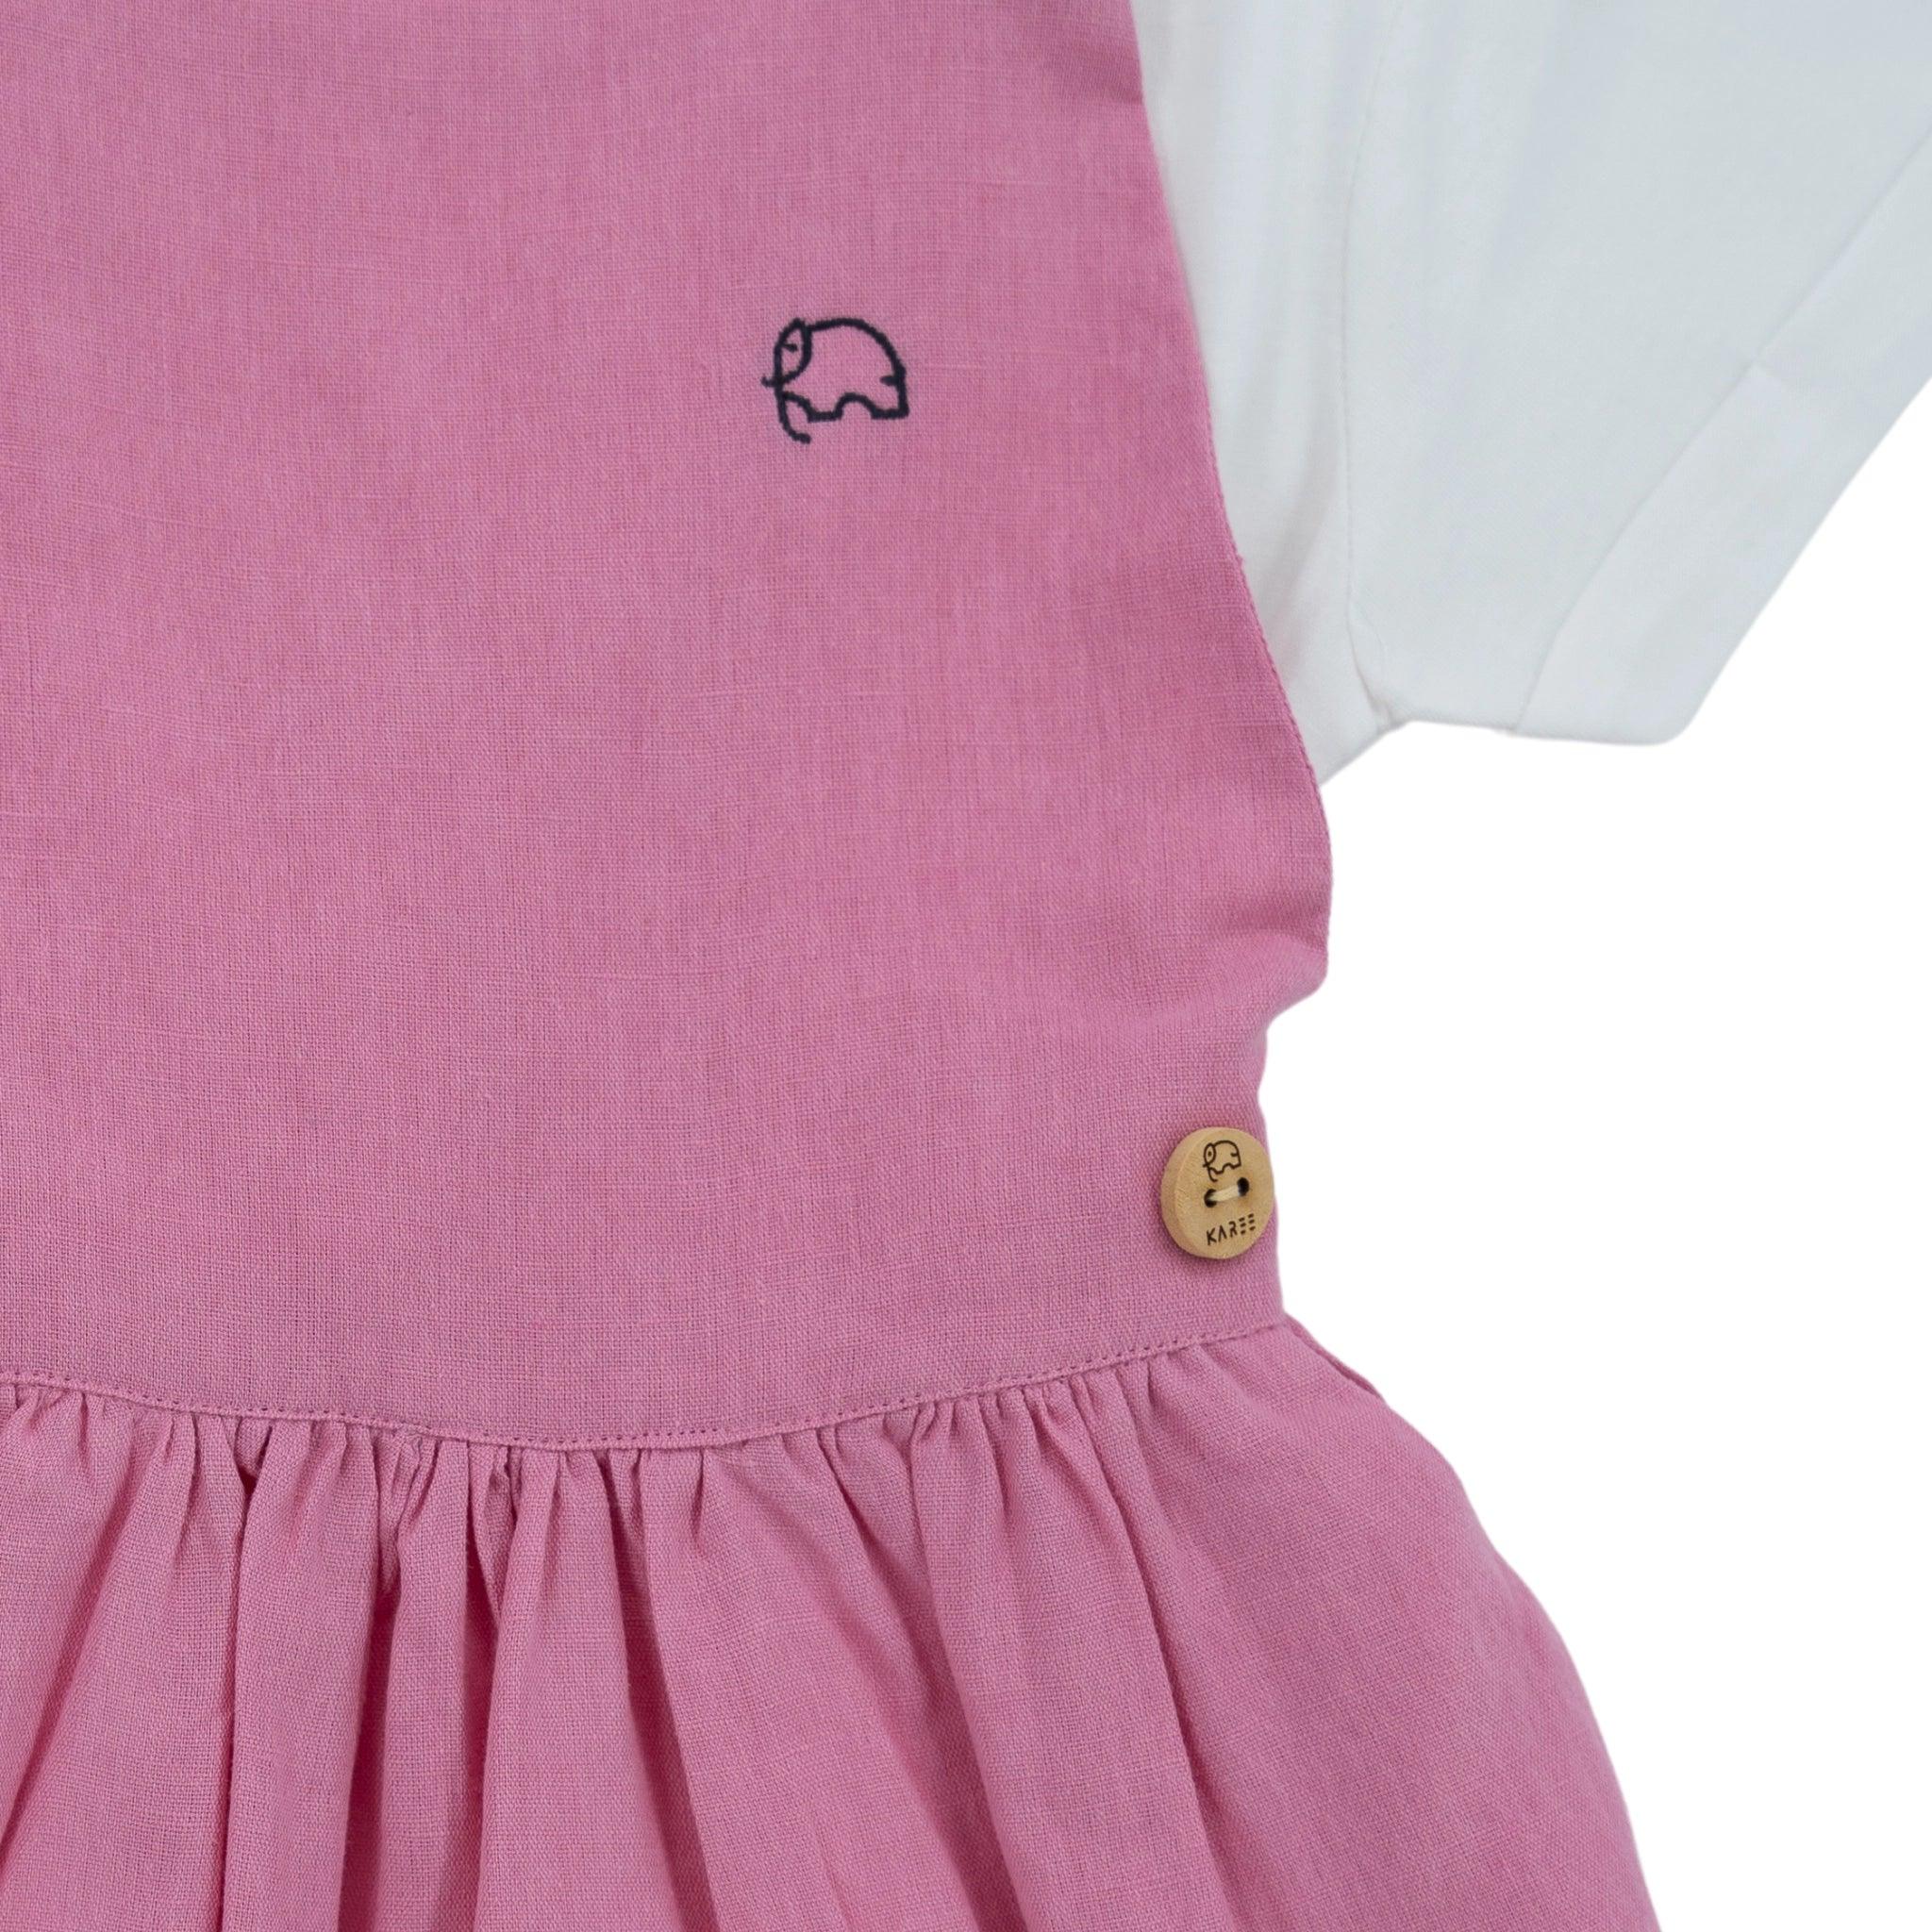 Close-up of a Karee Cashmere Rose Linen Pinafore, detailed with a small elephant embroidery and a wooden button engraved with a leaf design.